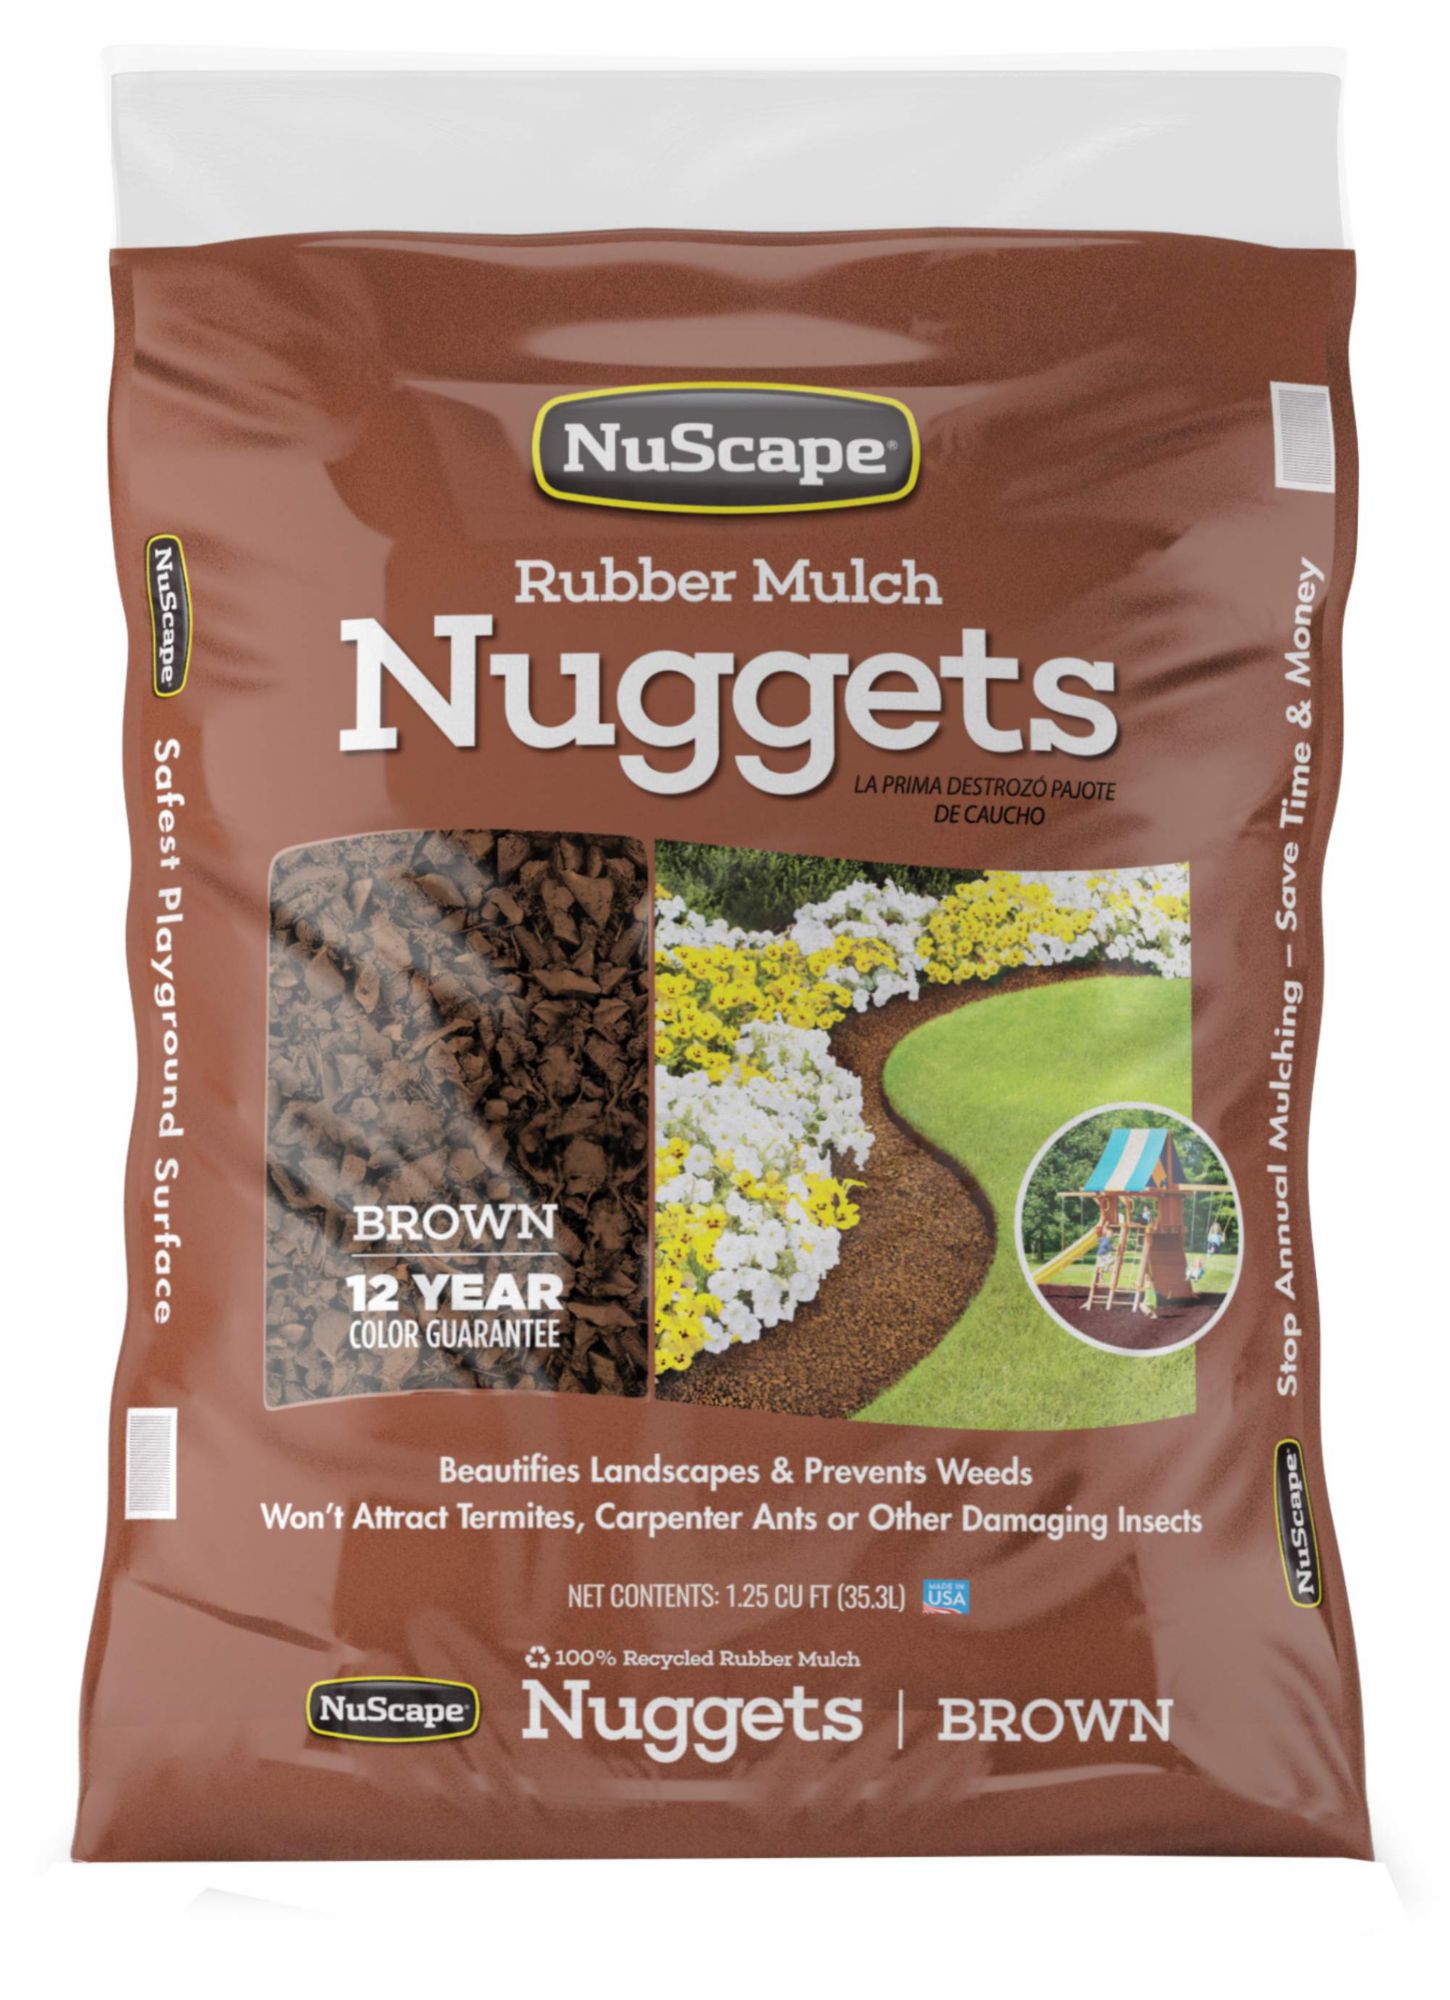 Wholesale - Red BJ\'s Cu. NuScape Rubber Mulch | Ft. Nuggets, 1.25 Club